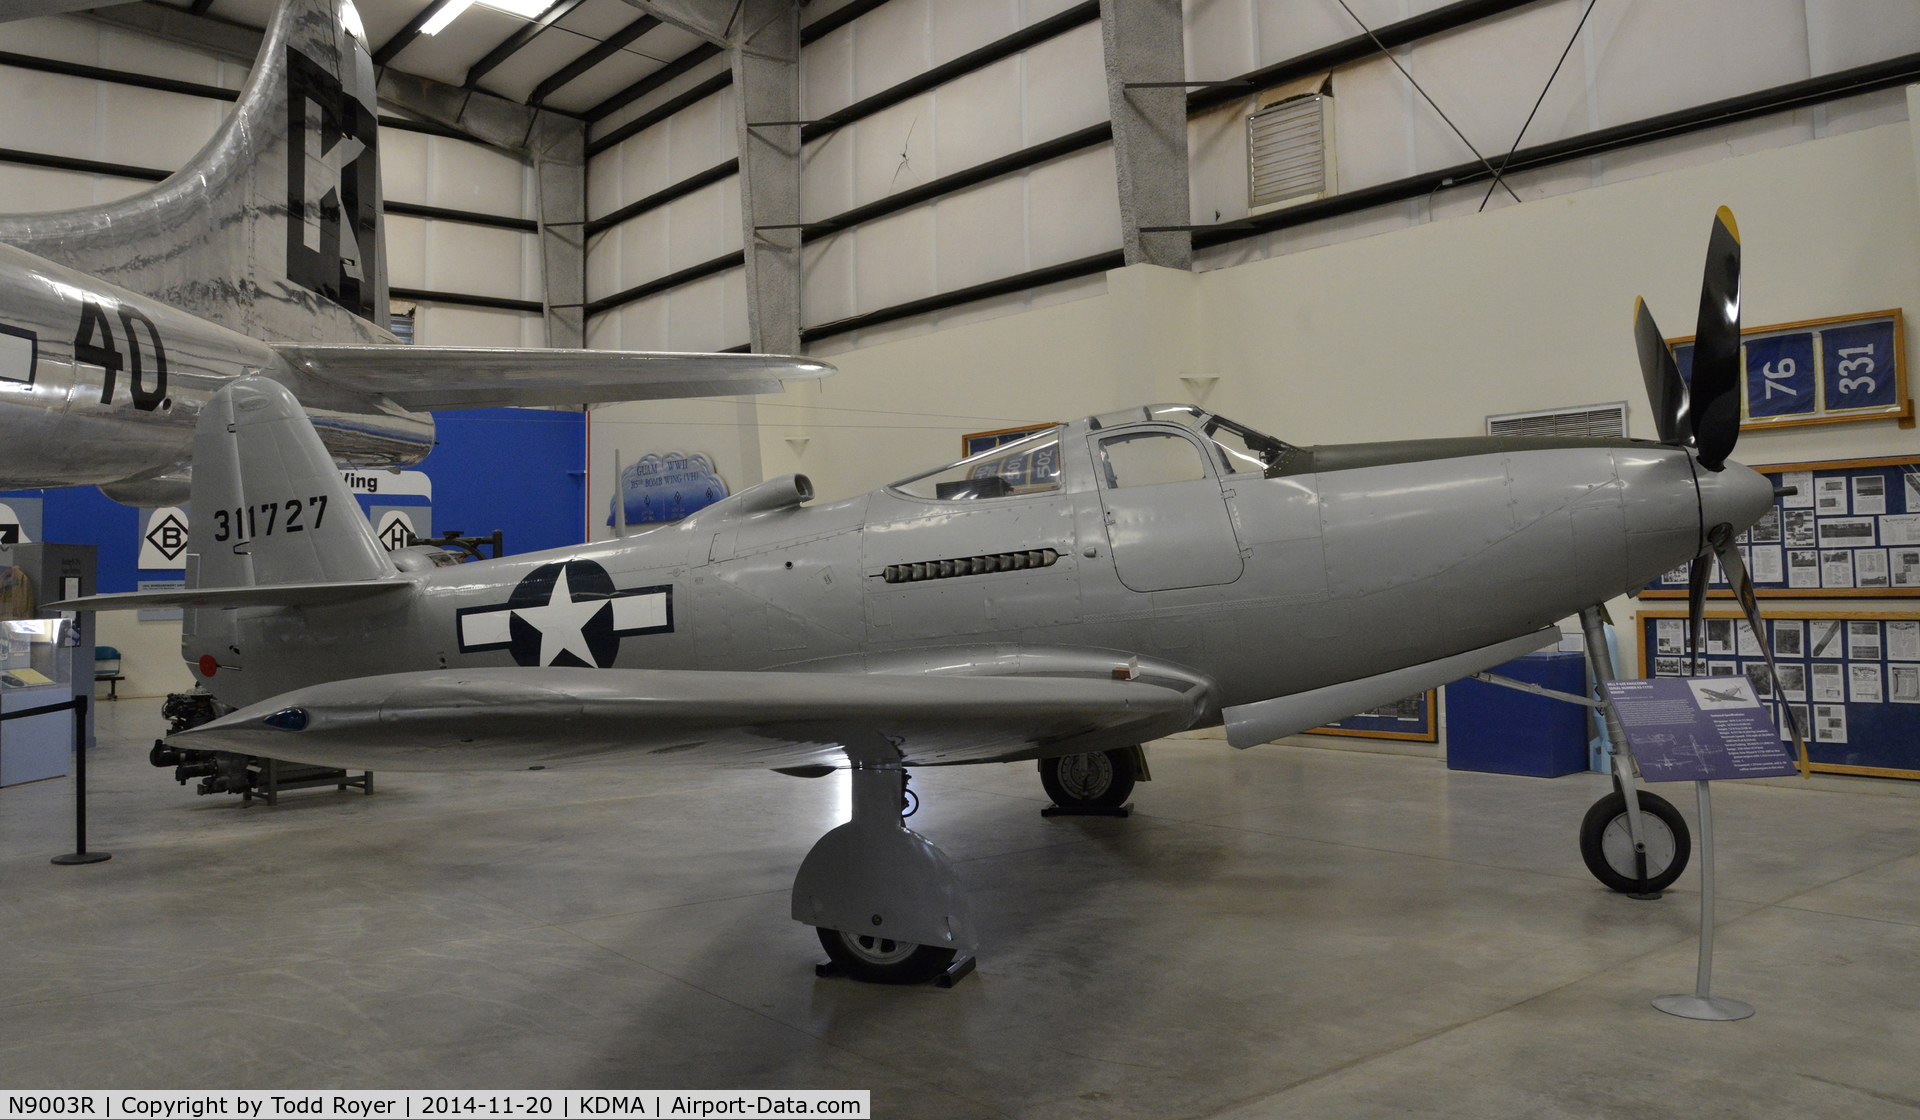 N9003R, 1943 Bell P-63E-1-BE Kingcobra C/N 4311727 (400 FAHo), On Display at the Pima Air and Space Museum